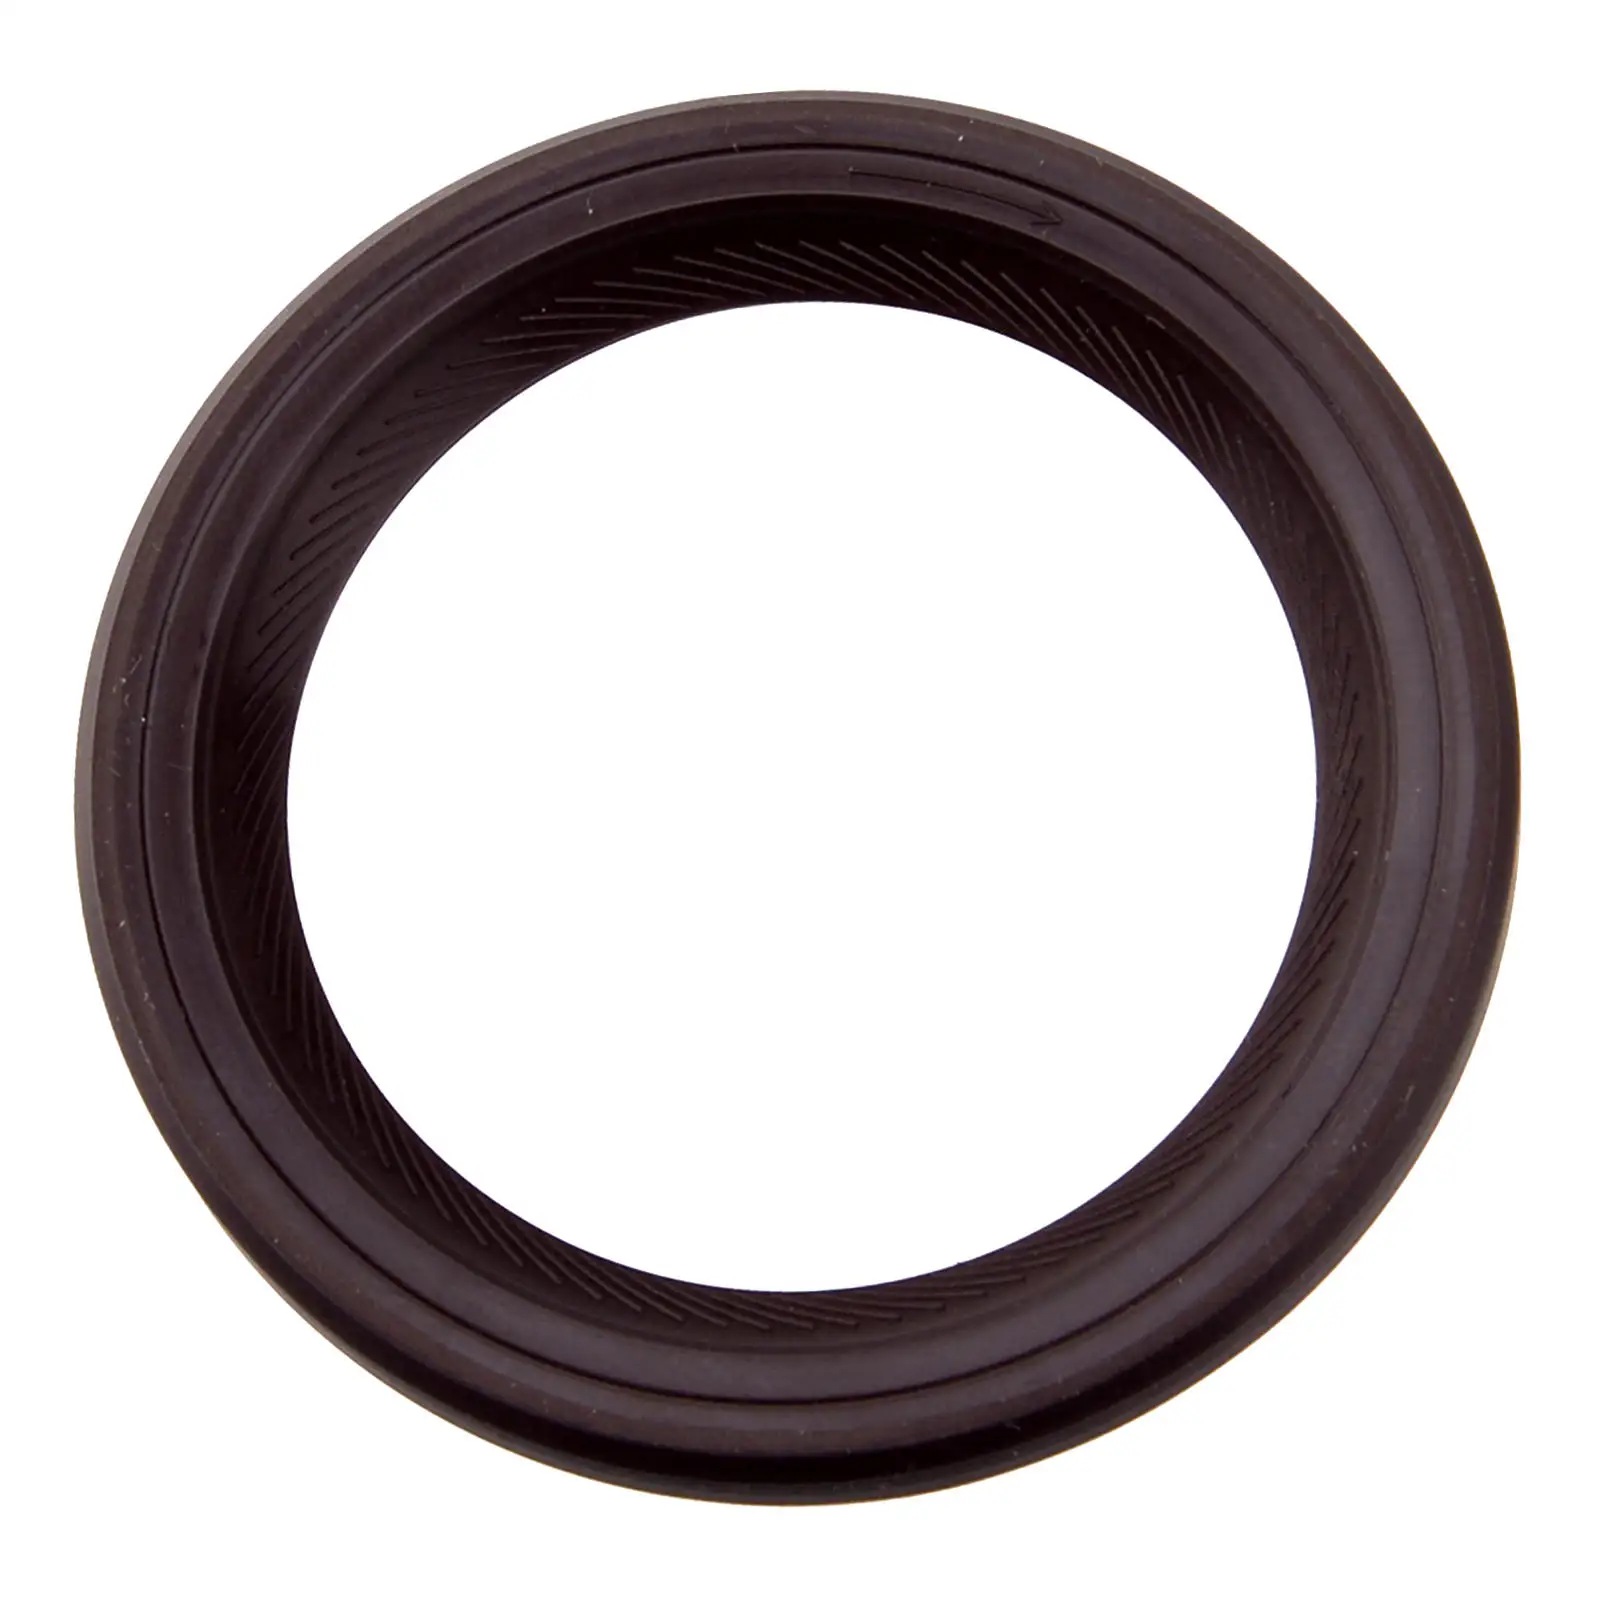 01V Gearcase Oil Seal Replacement DIY Vehicle Parts Transmission Oil Seal Fit for Zf5HP19